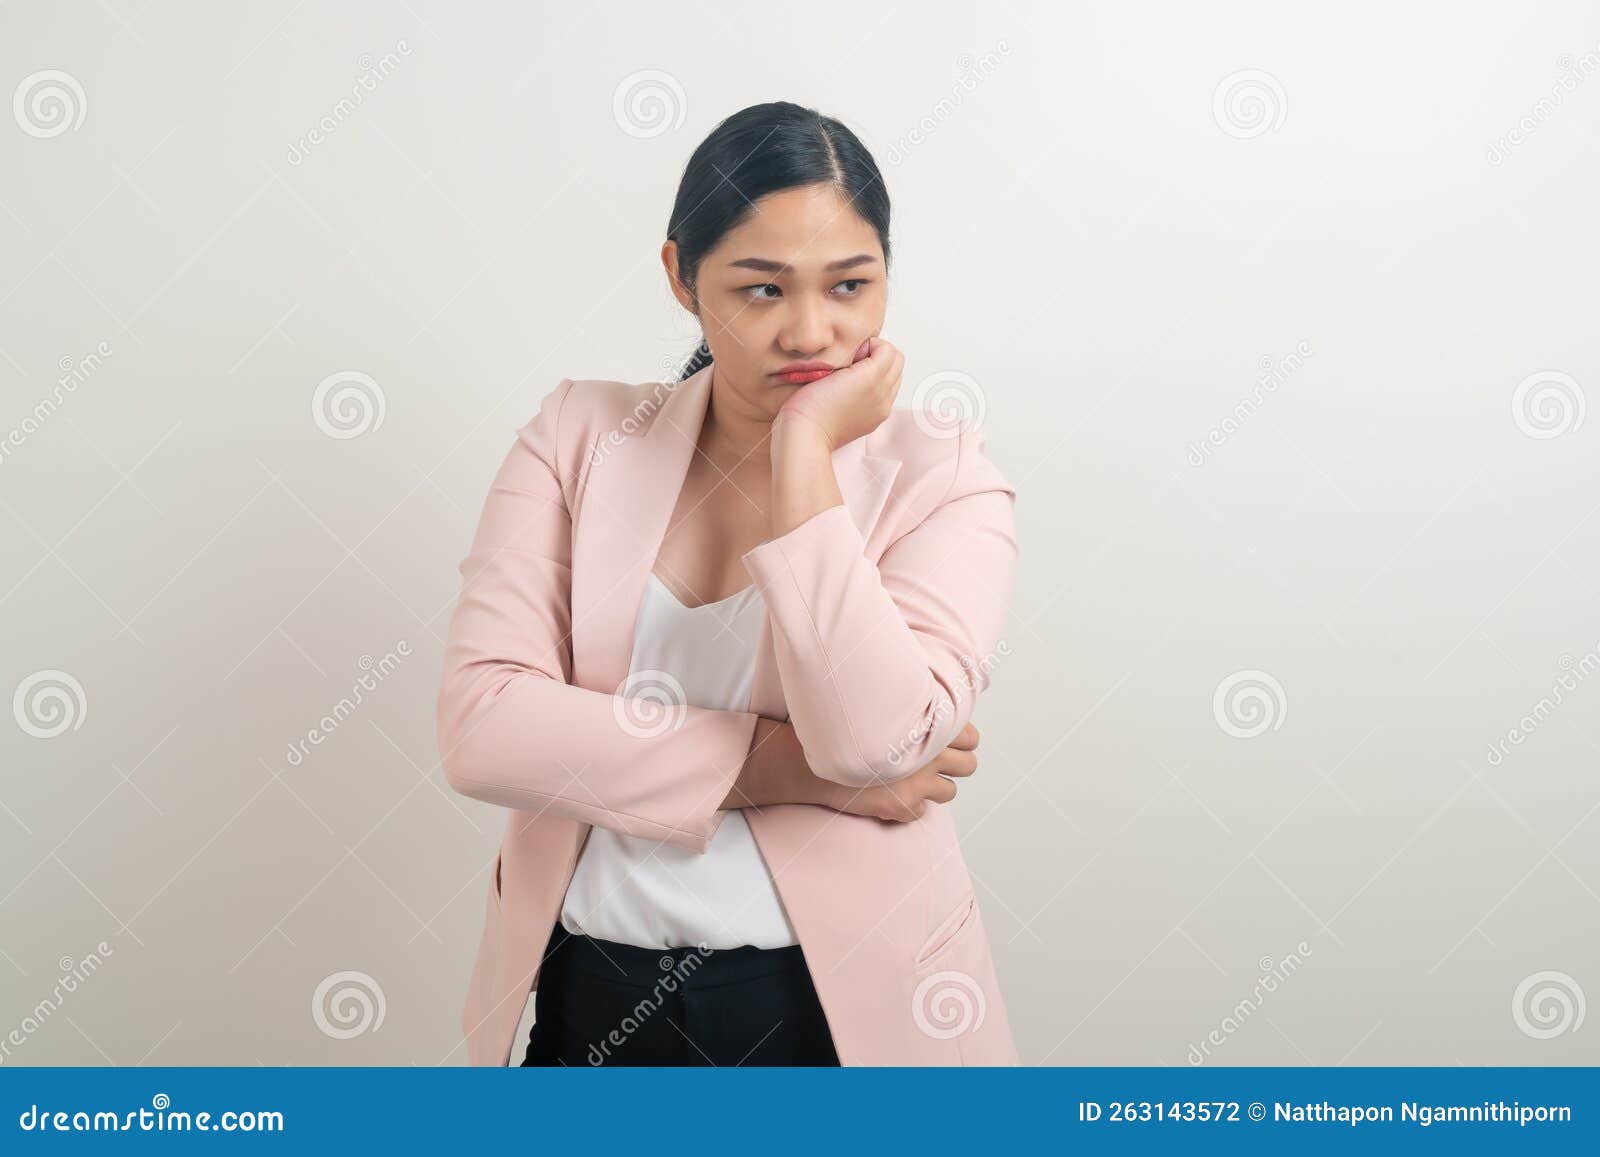 young asian woman with sulk face